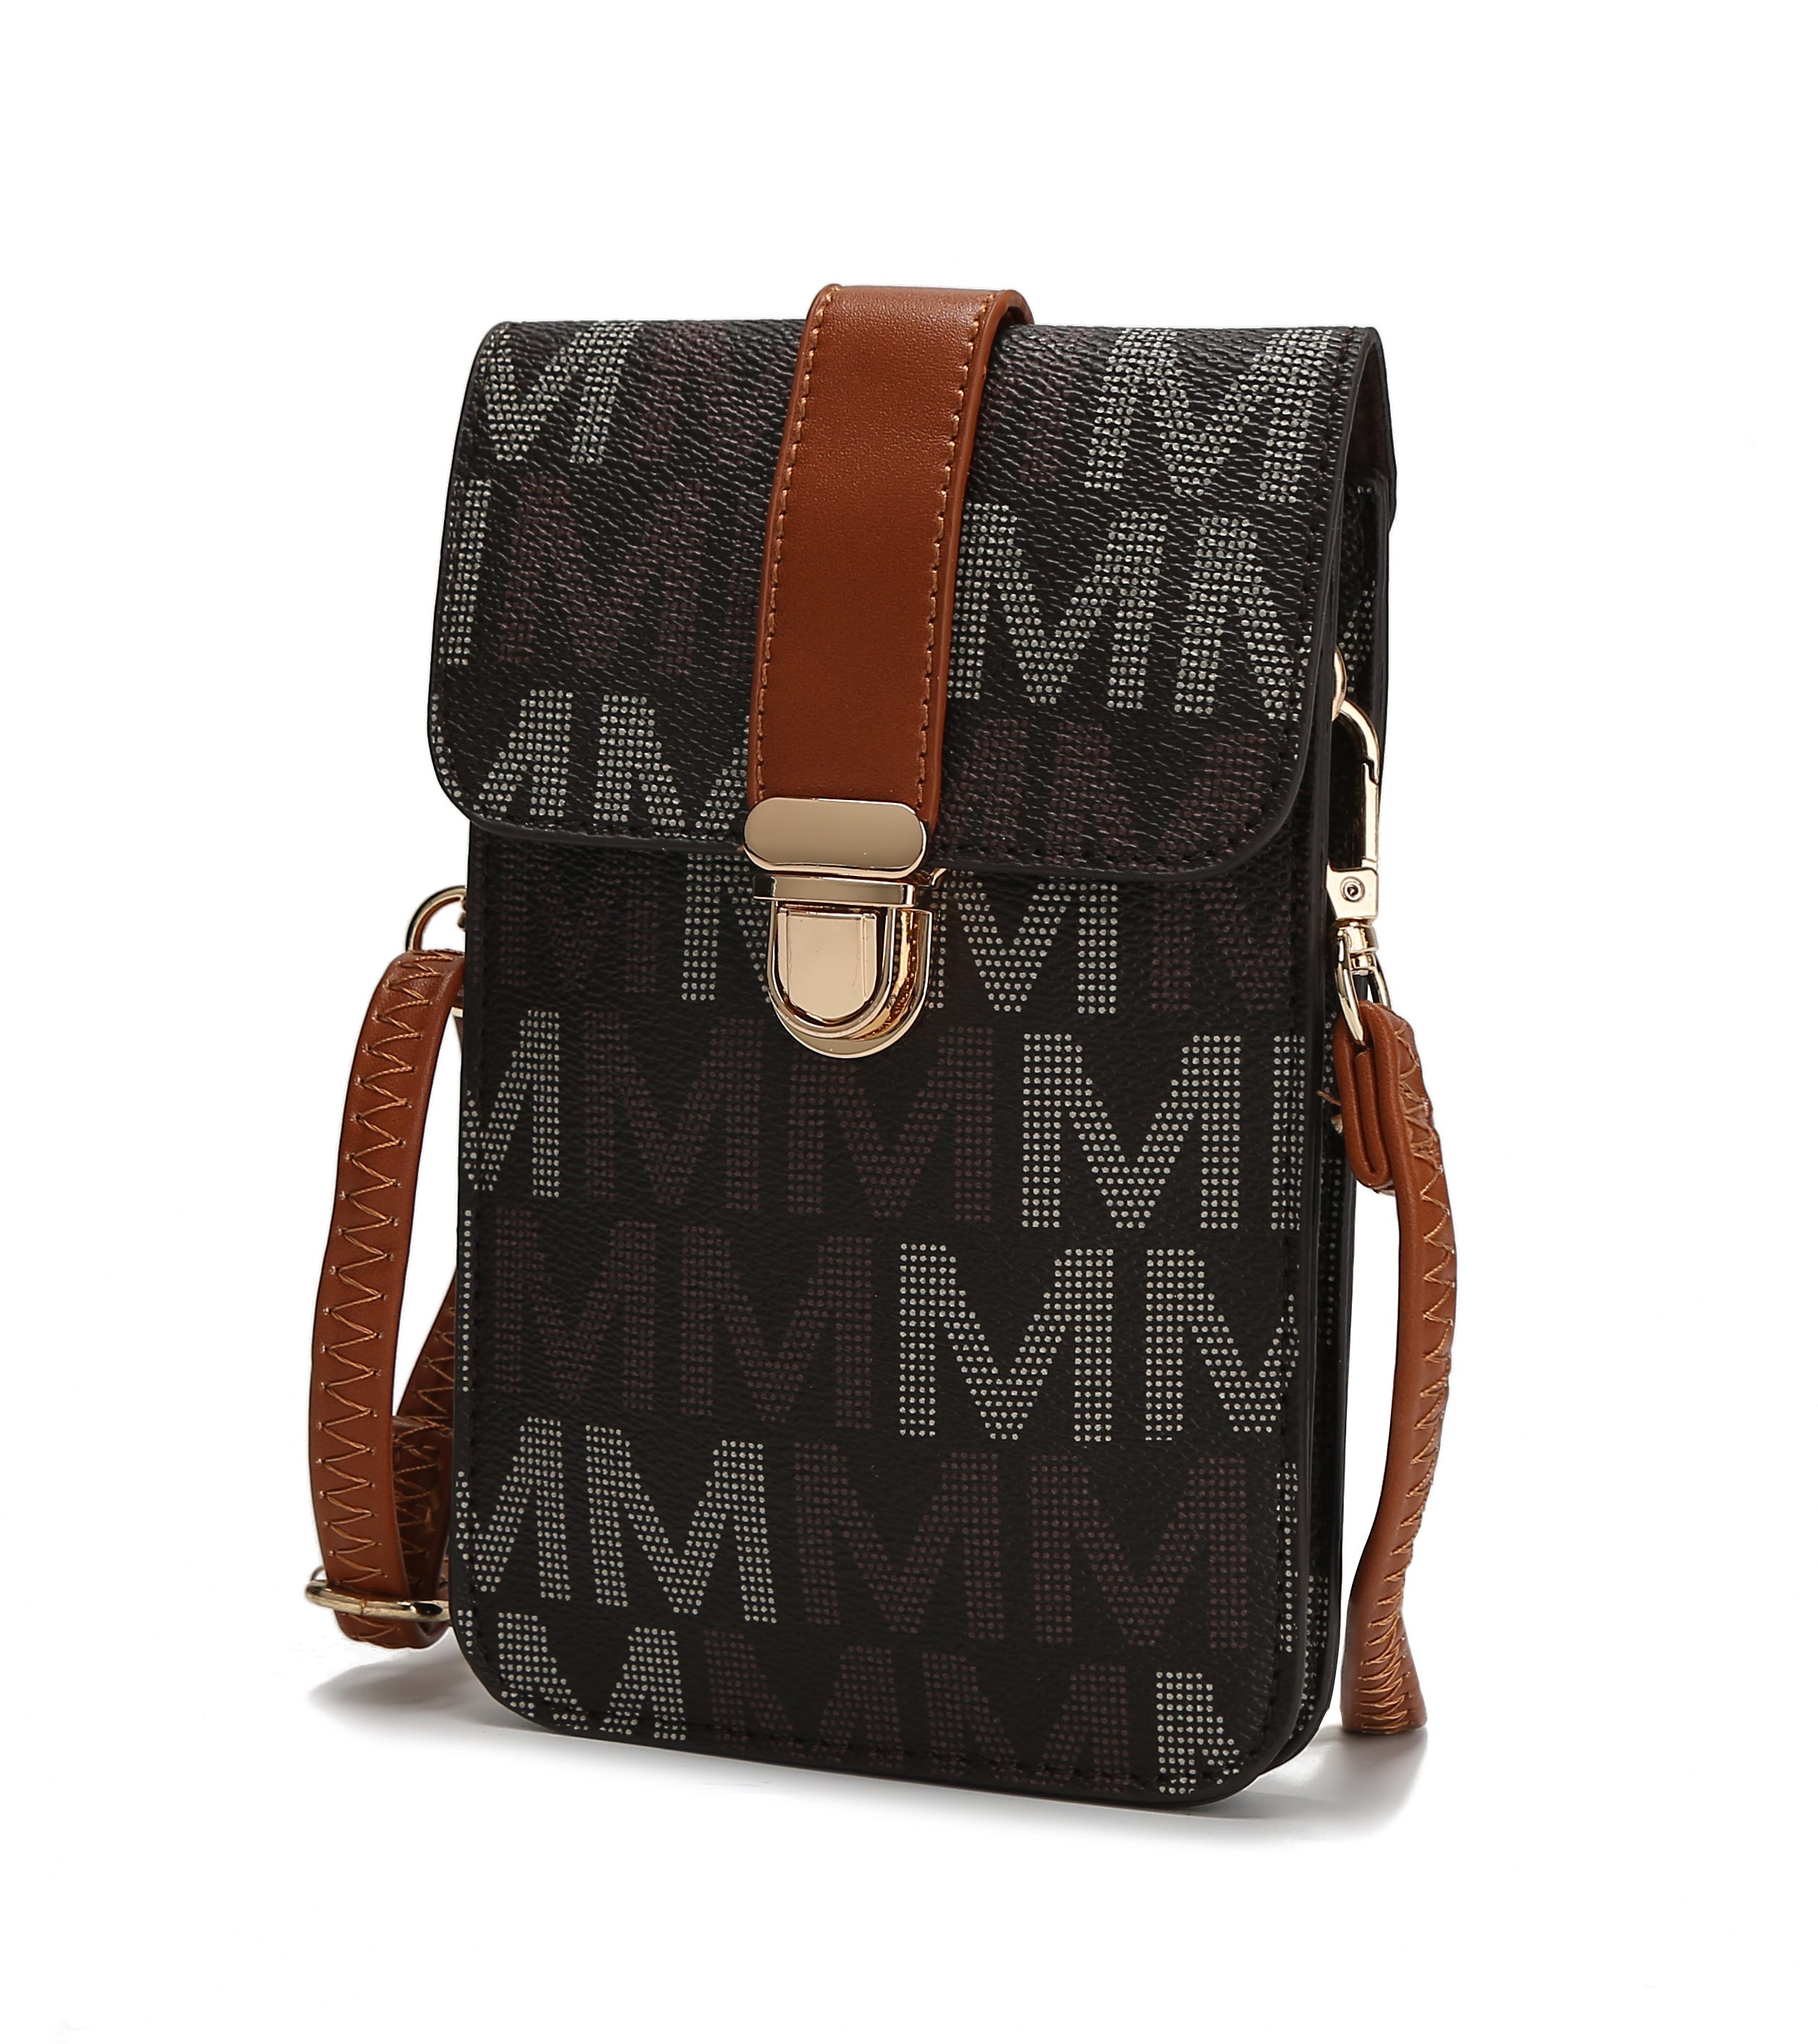 A brown and black patterned messenger bag with a front flap, metal clasp, and an adjustable shoulder strap.